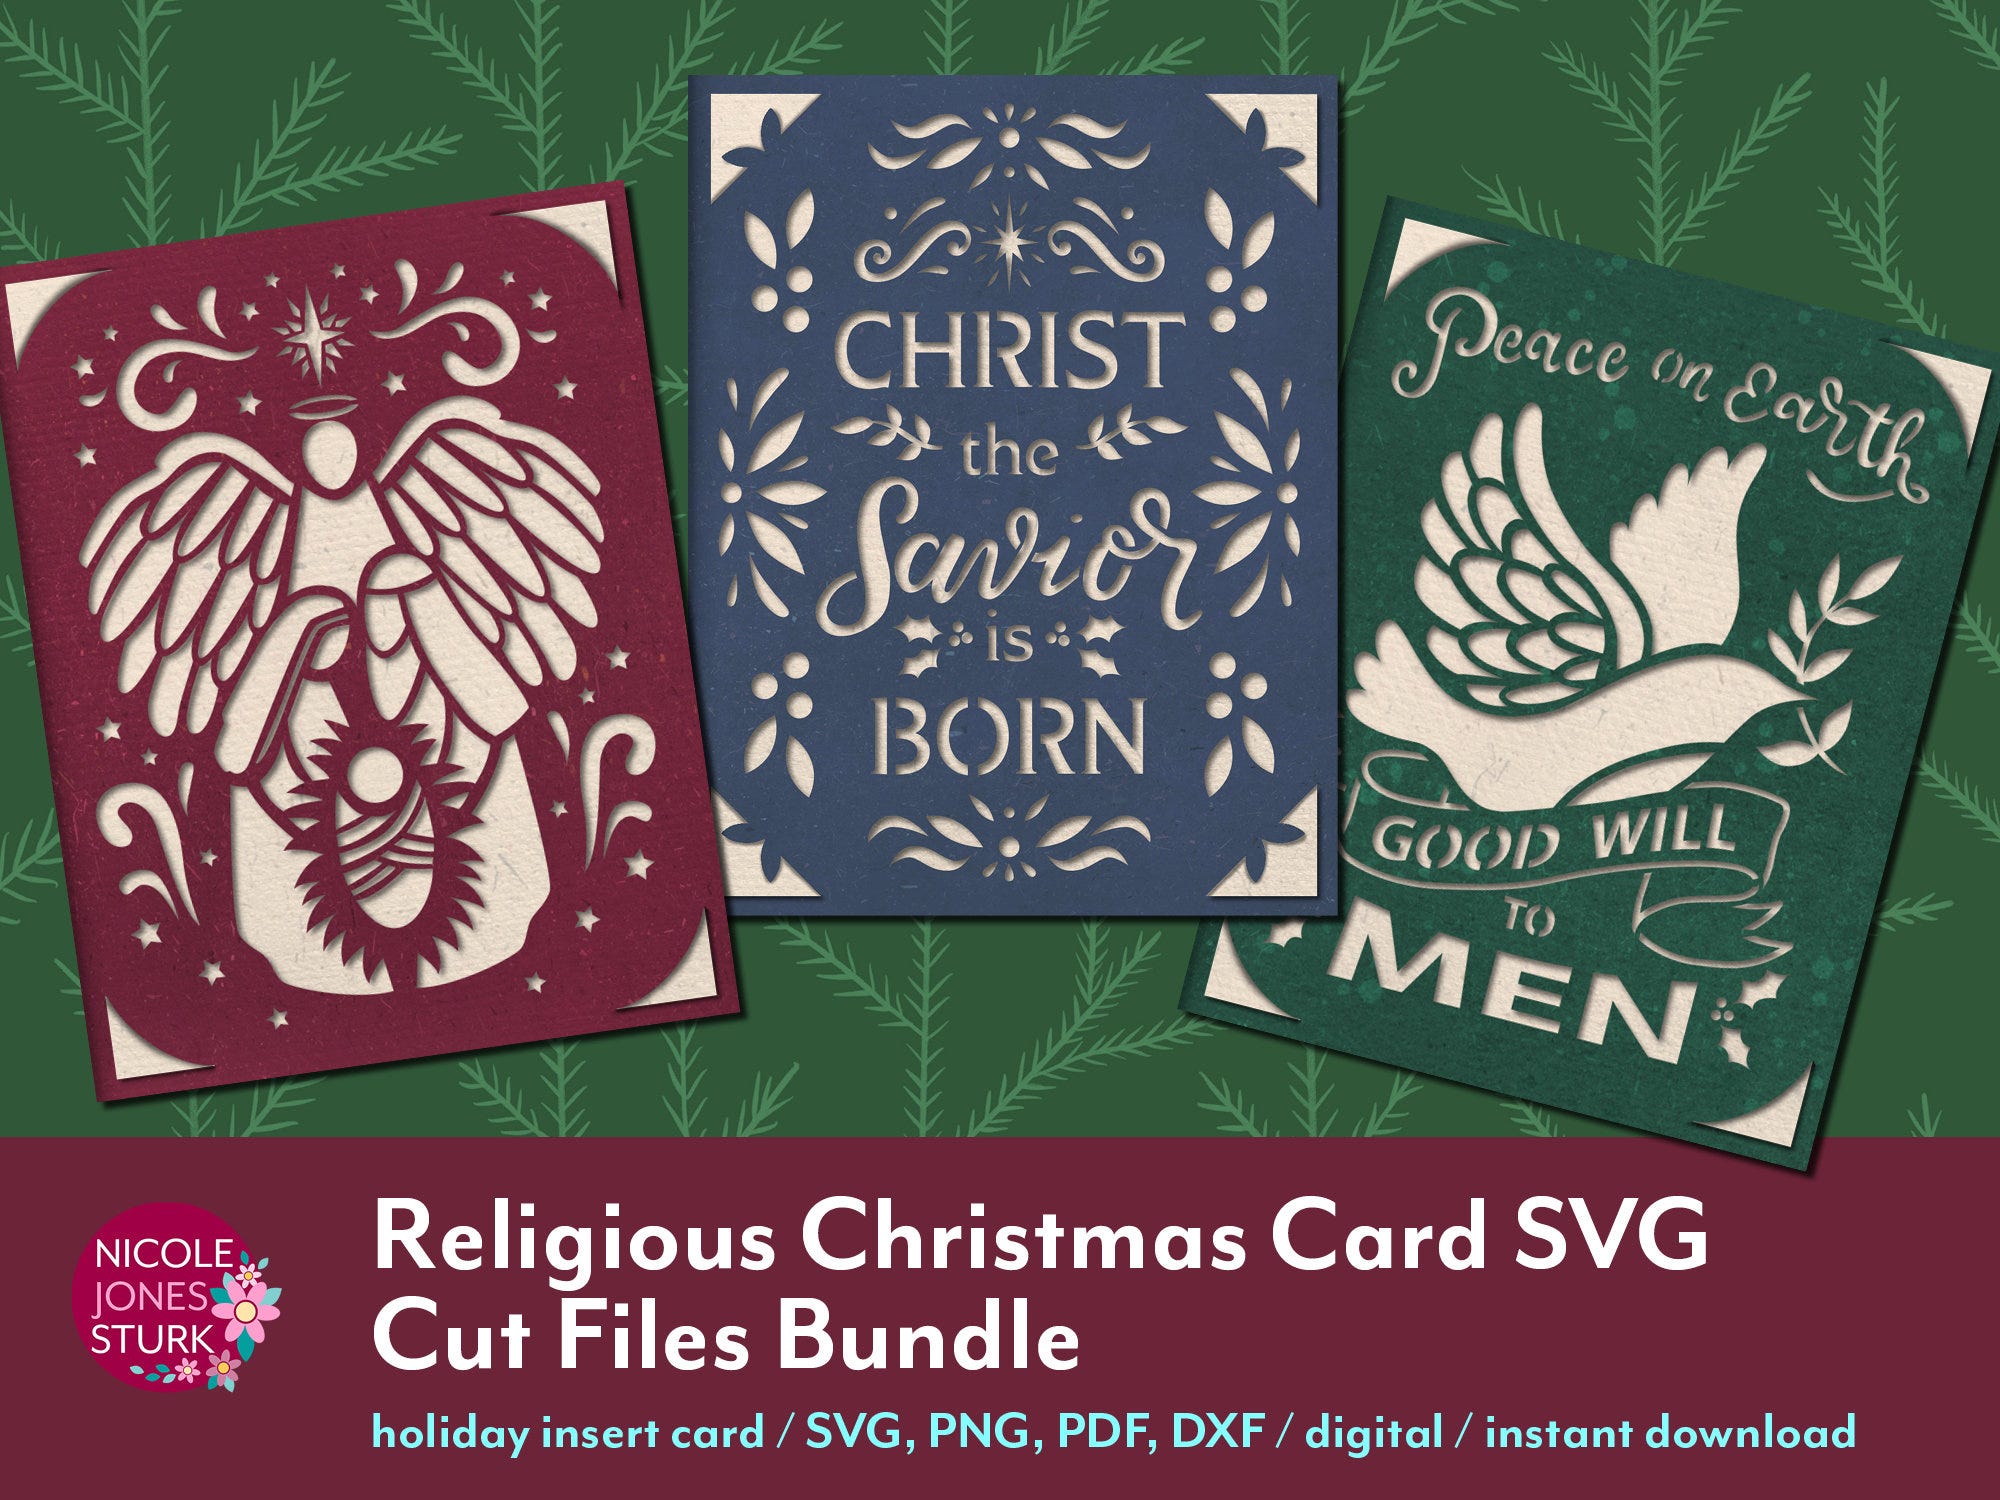 Religious Christmas Card SVG cut files bundle / insert cards / holiday greeting cards / svg, png, dxf, pdf / digital / instant download